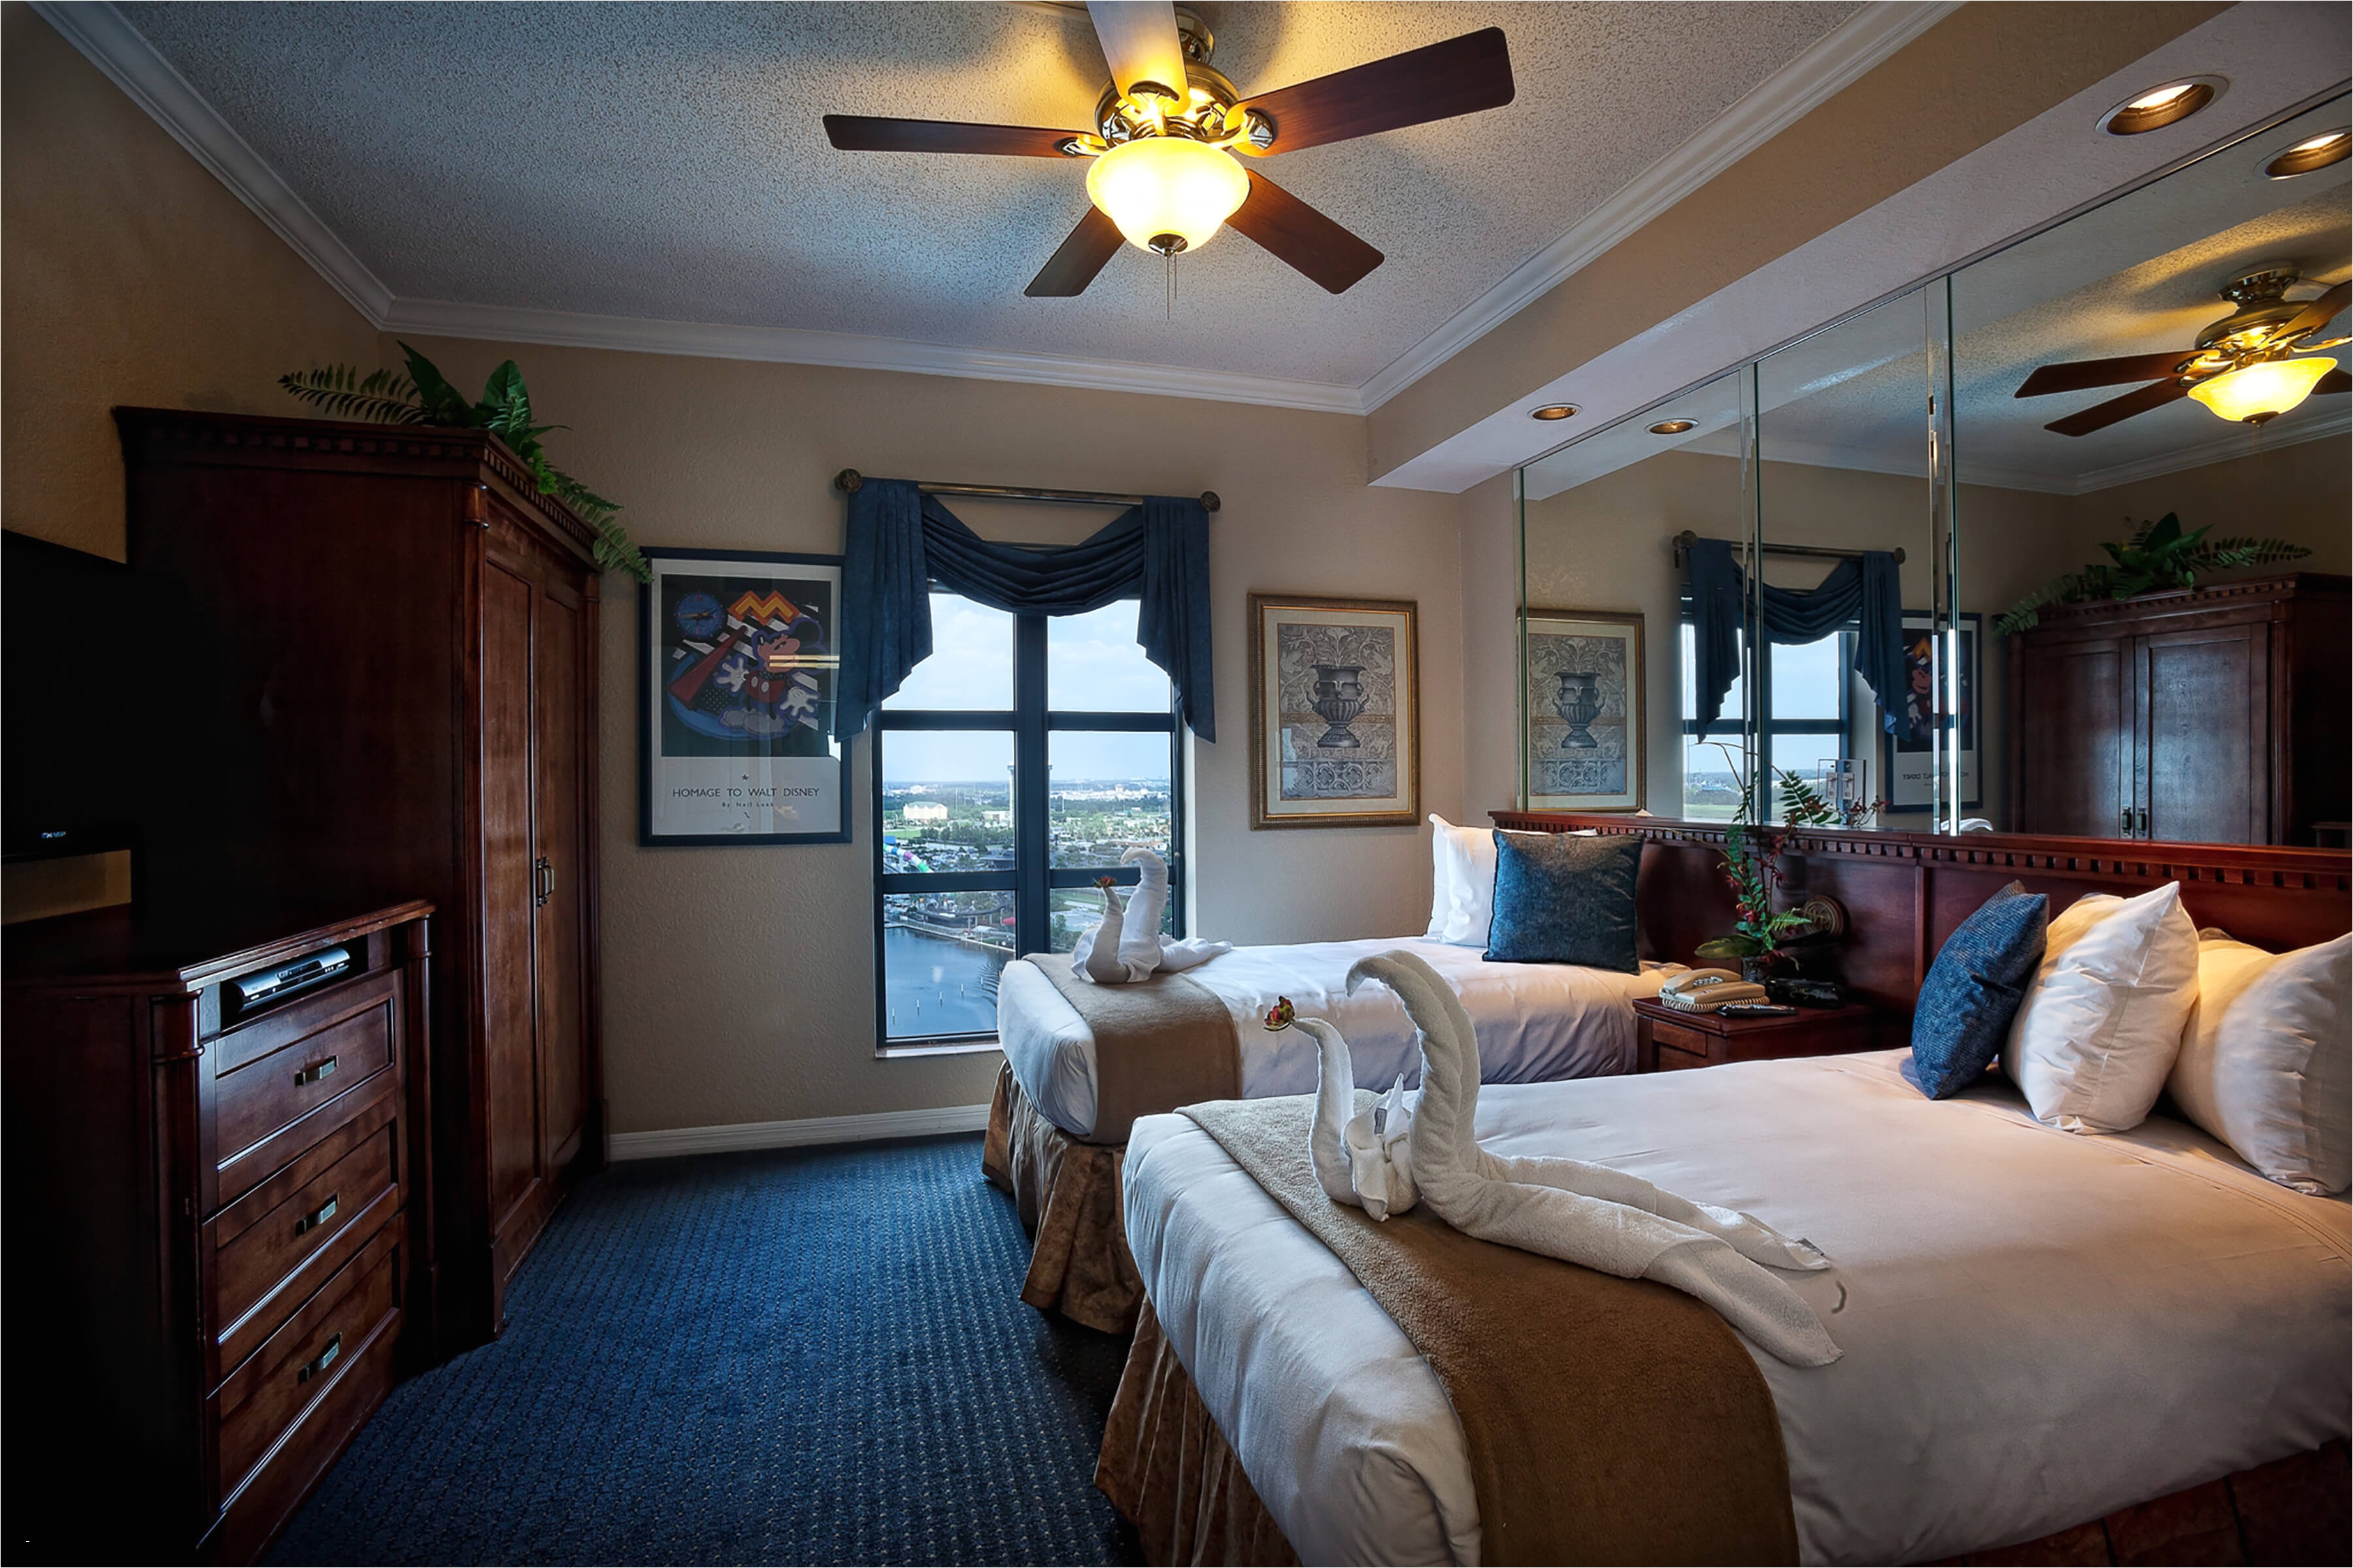 2 bedroom suites in orlando on international drive new westgate palace resort s of hotels in